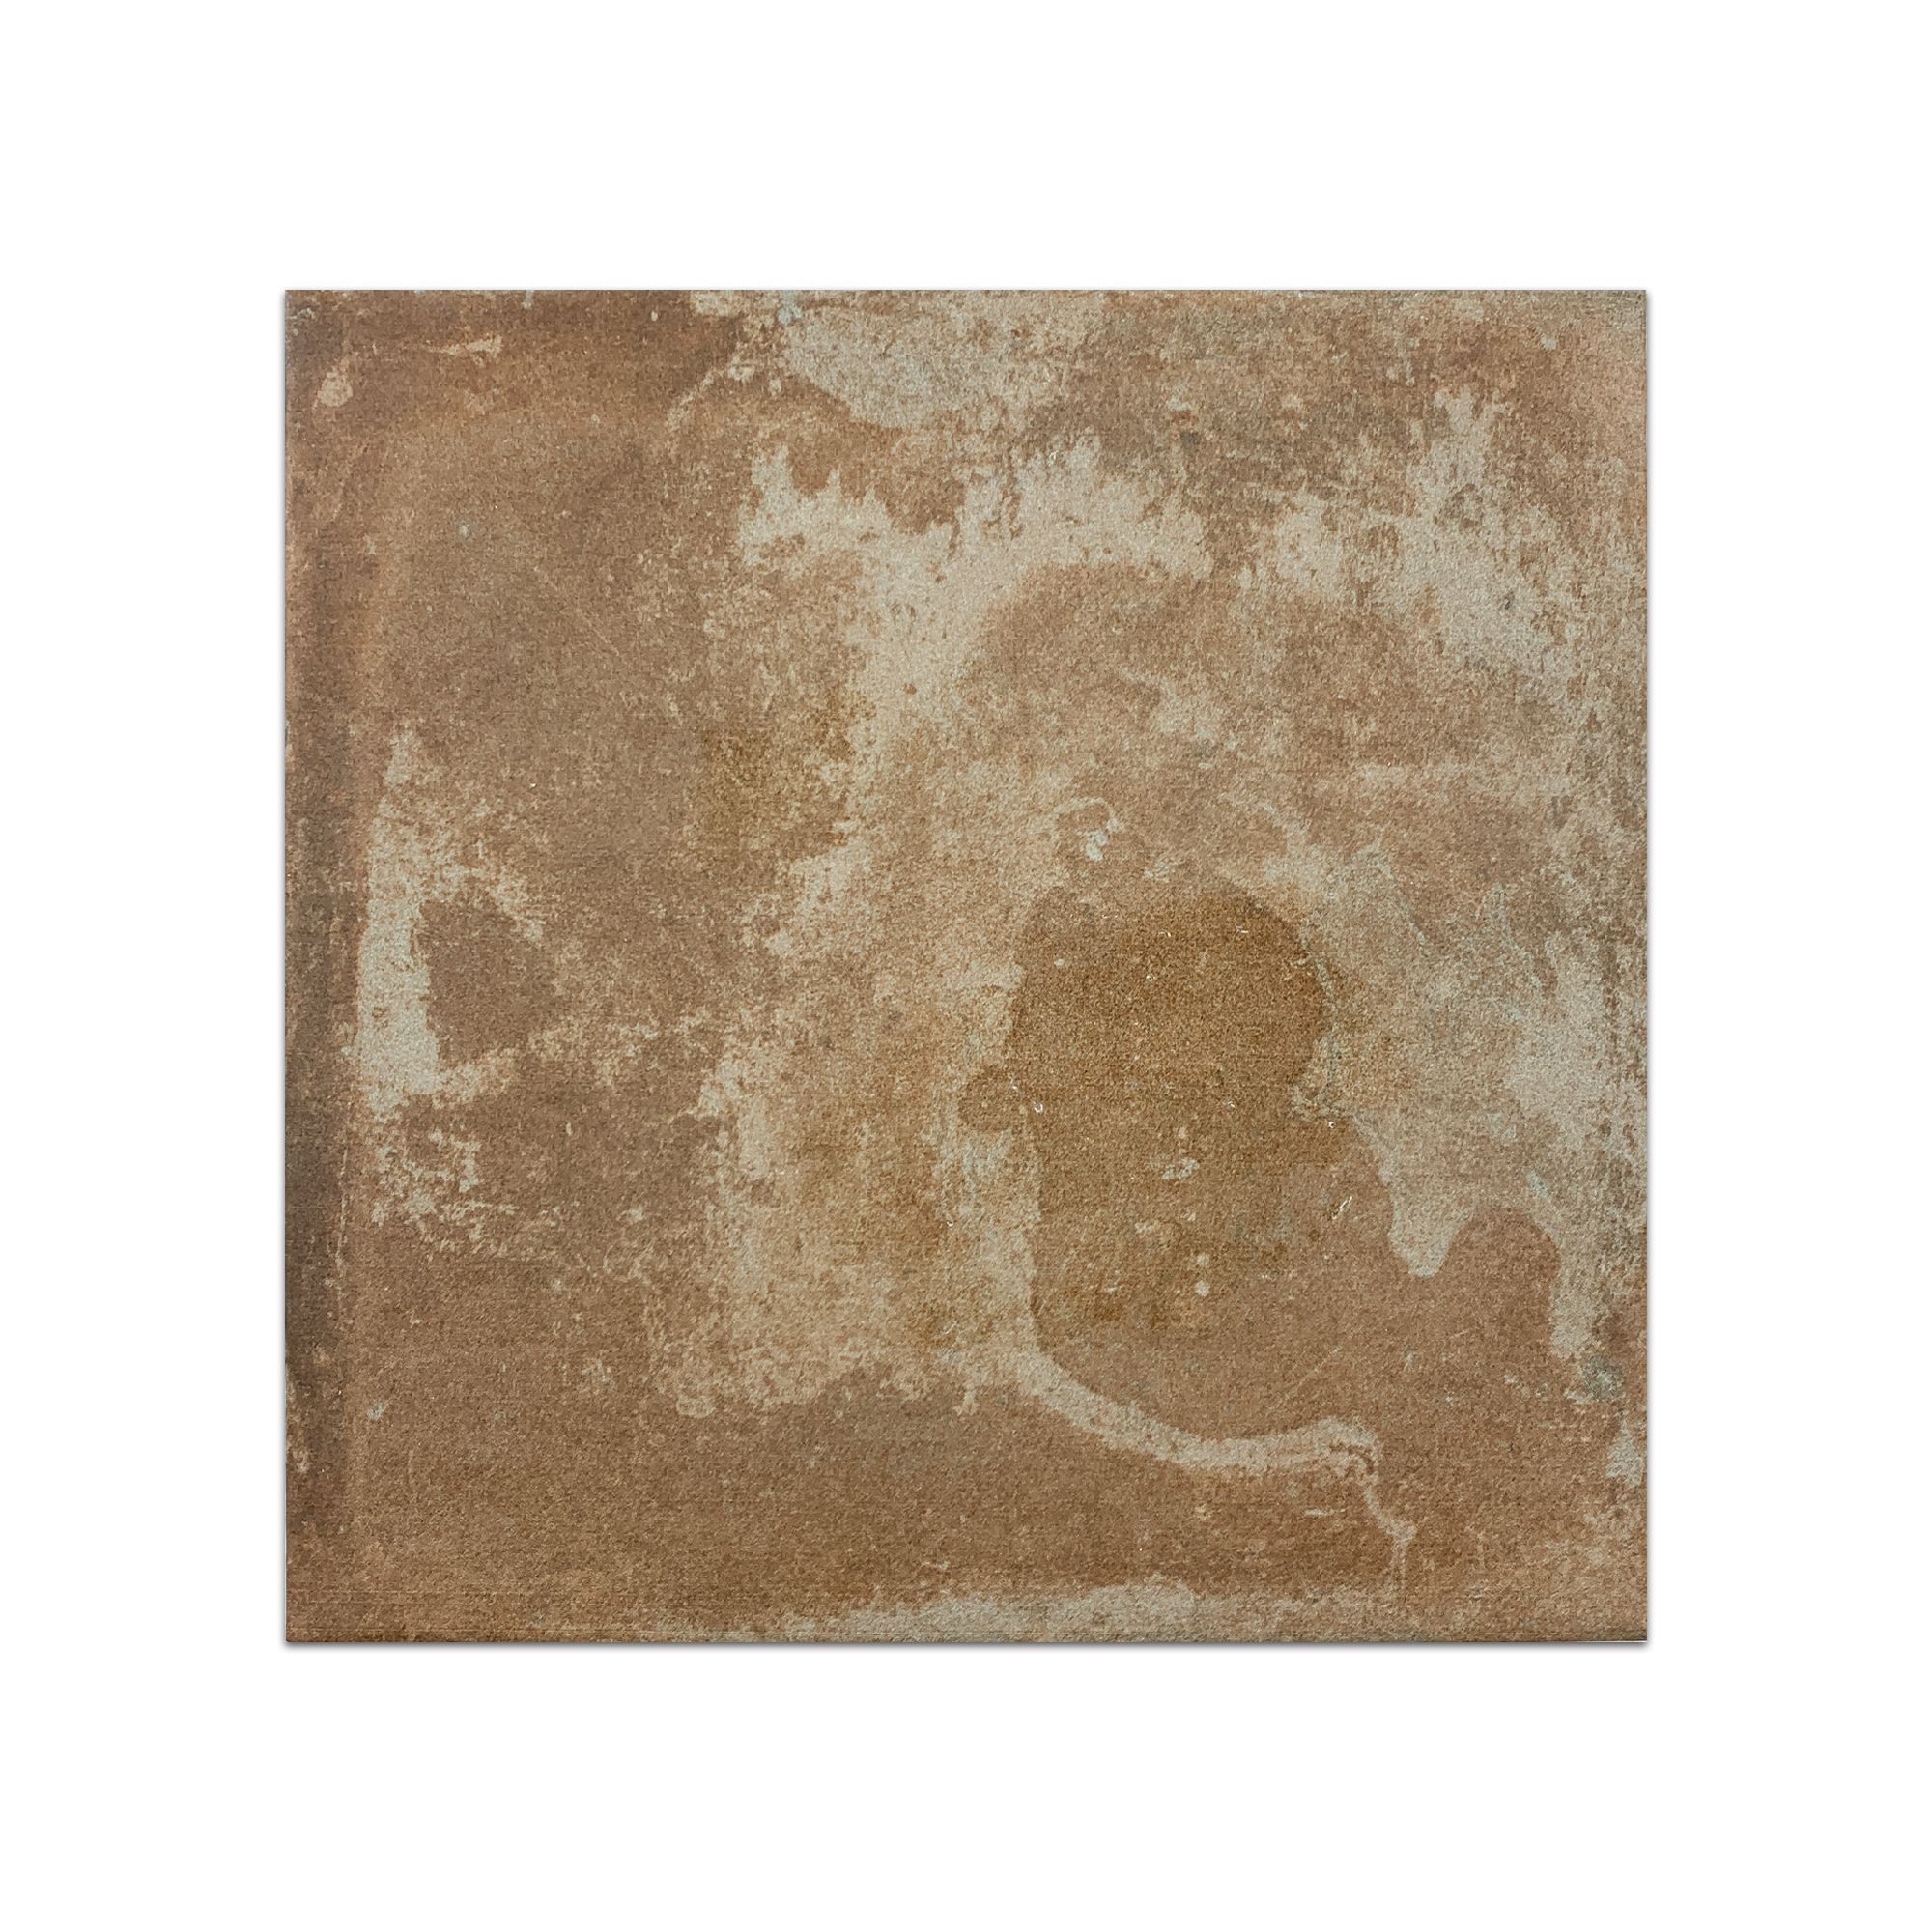 Elon Boston Brick West Porcelain Rectangle Field Tile 14x14x0.375 Natural Pressed BC102 Surface Group International Product